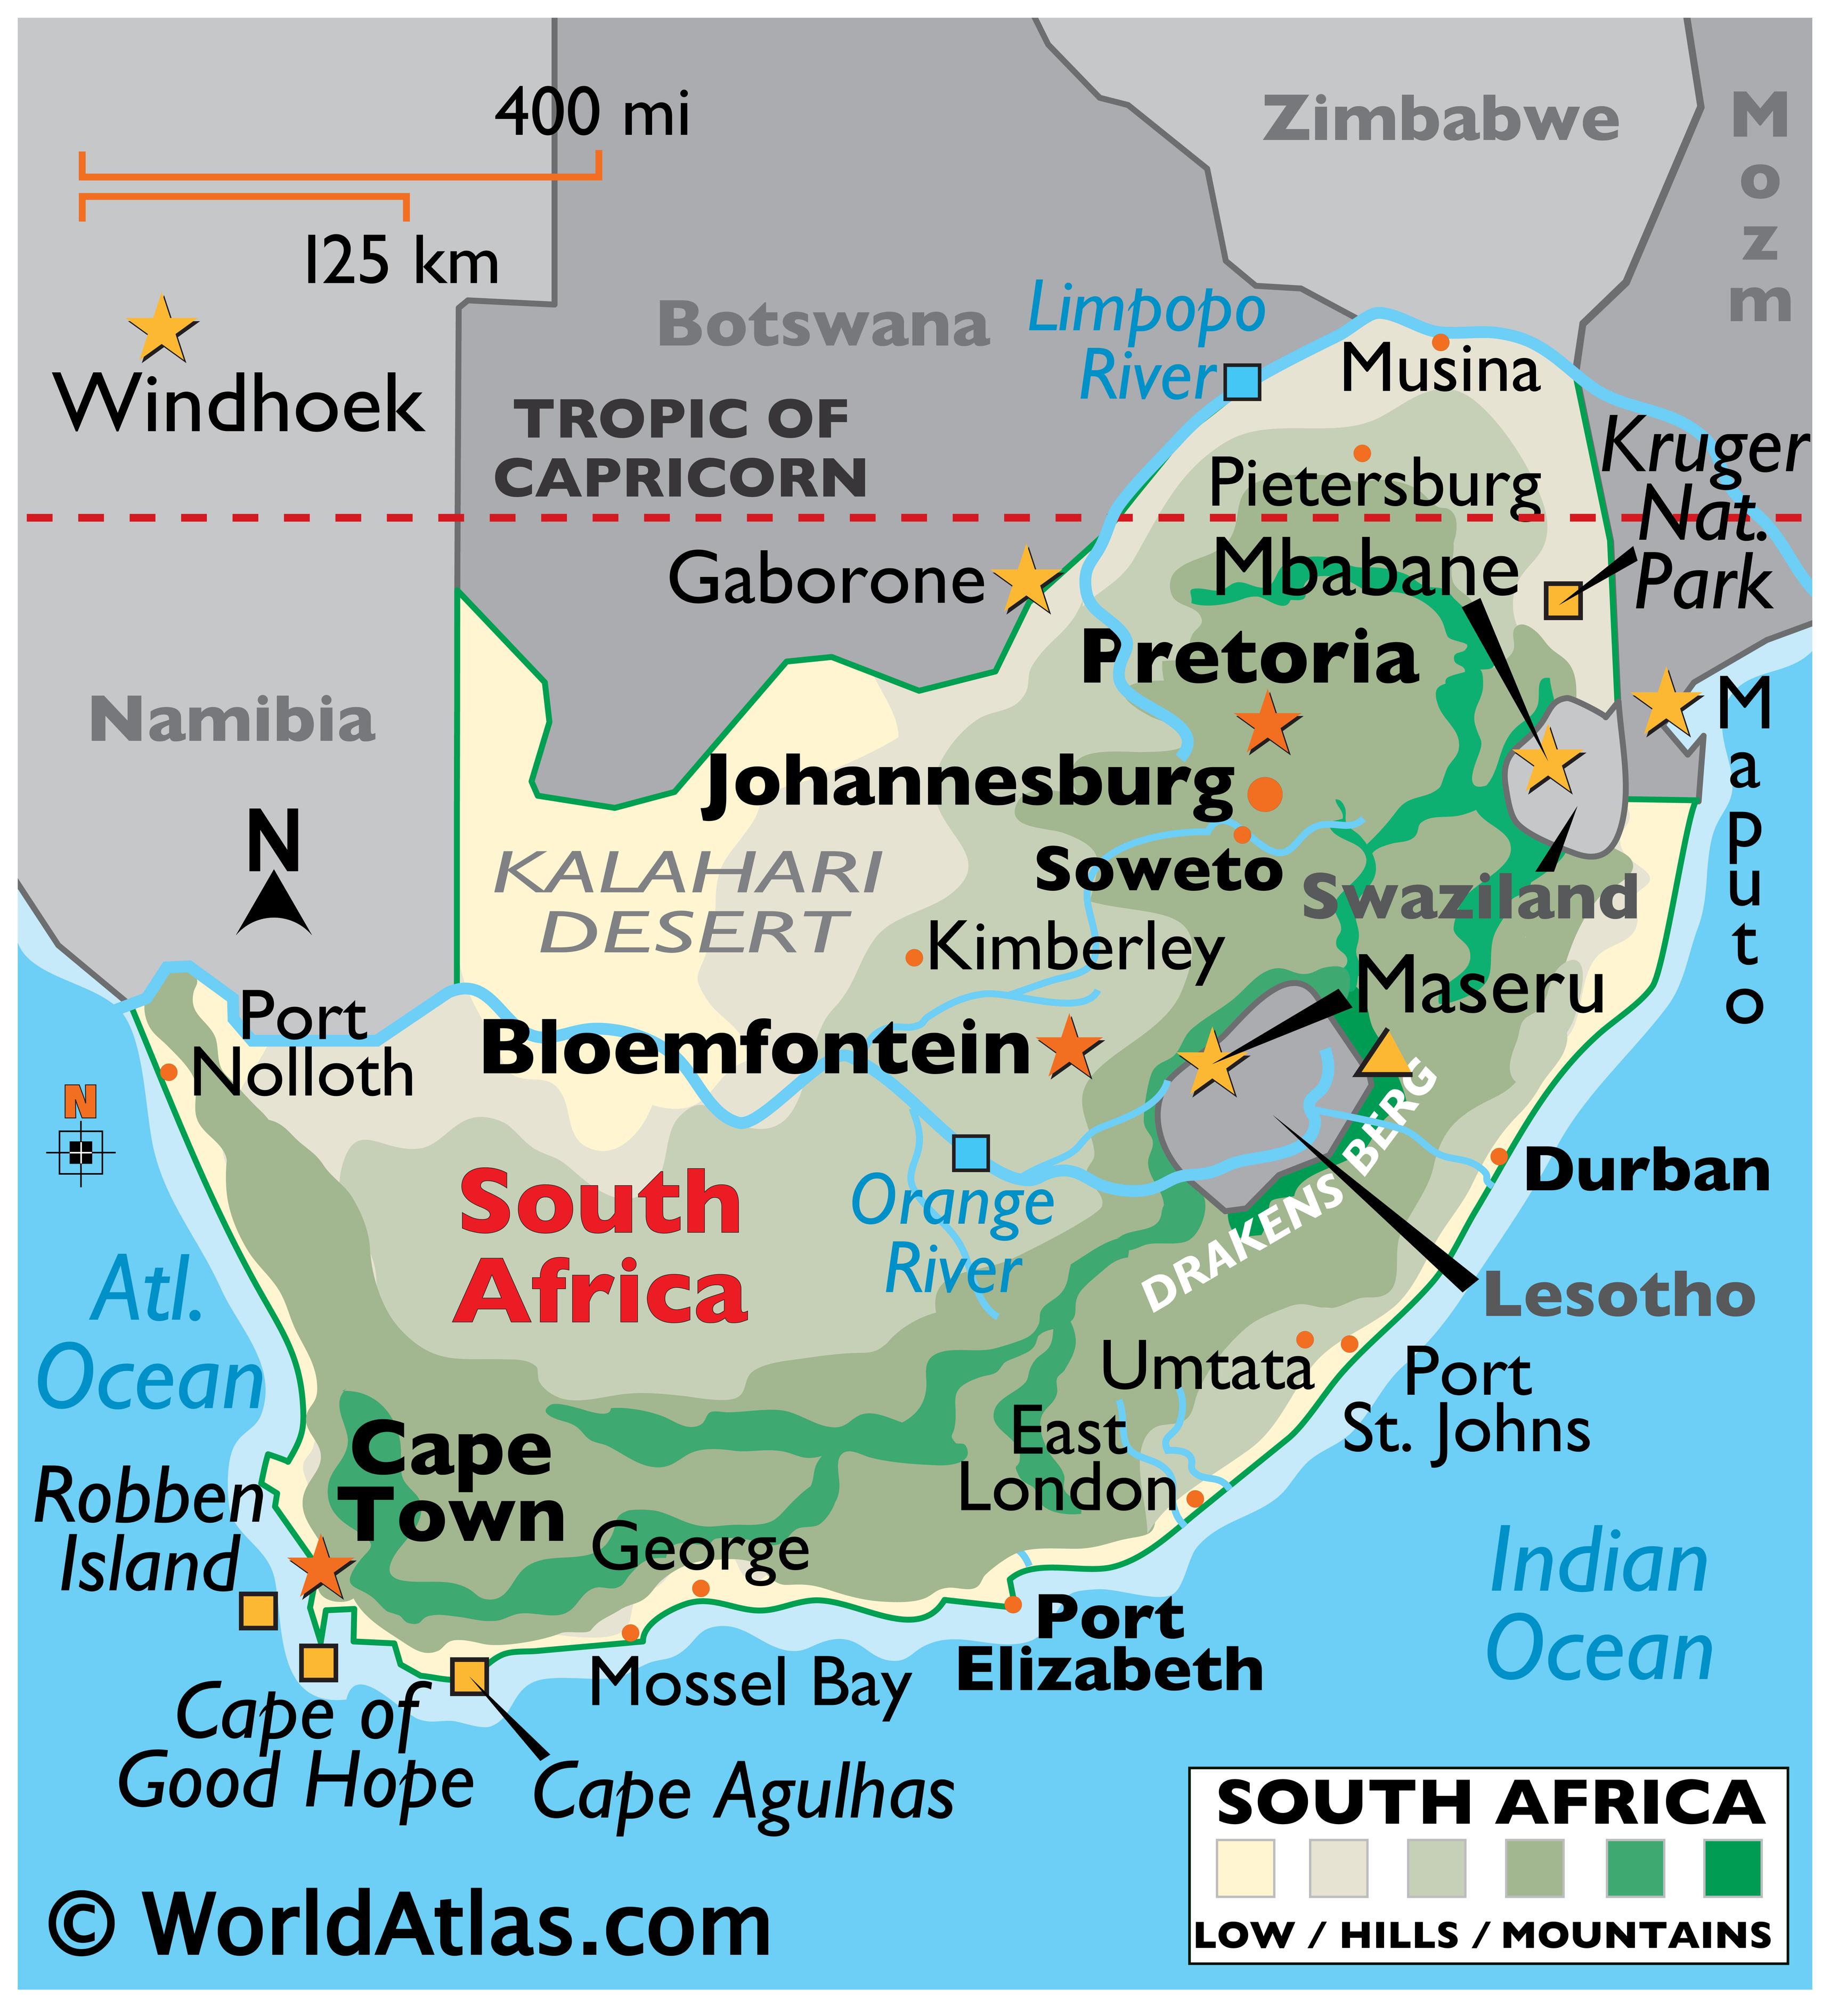 south-africa-map-geography-of-south-africa-map-of-south-africa-worldatlas